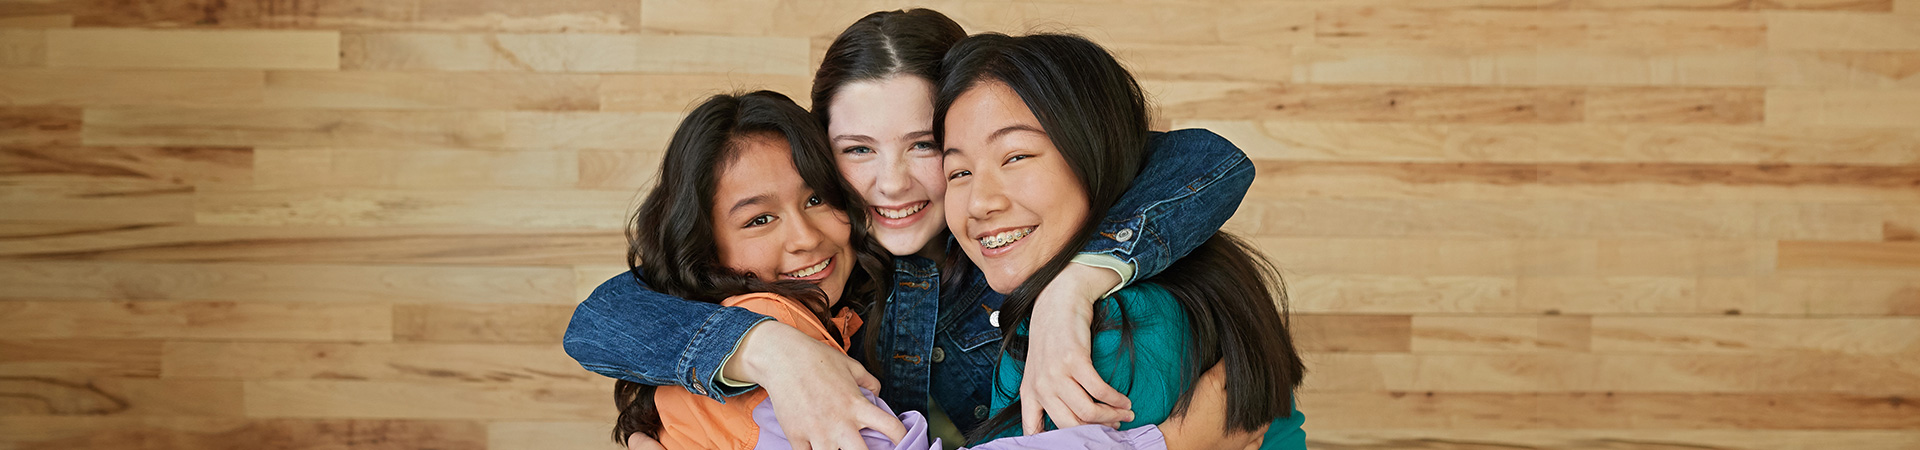  three young girl scouts with their arms wrapped around one another and smiling at the camera 